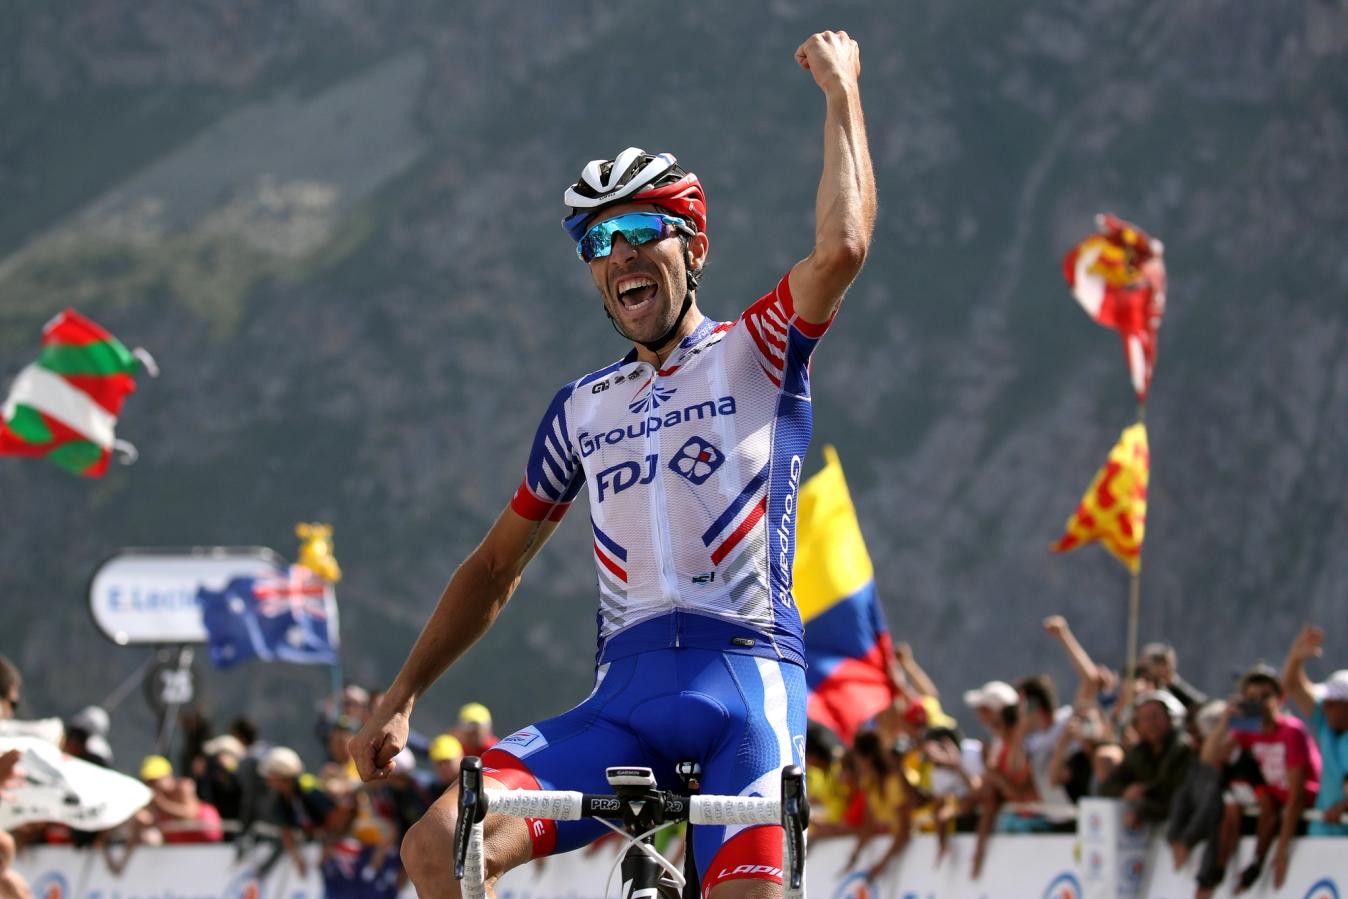 There are few finer sights in cycling than an on song Thibaut Pinot in the mountains